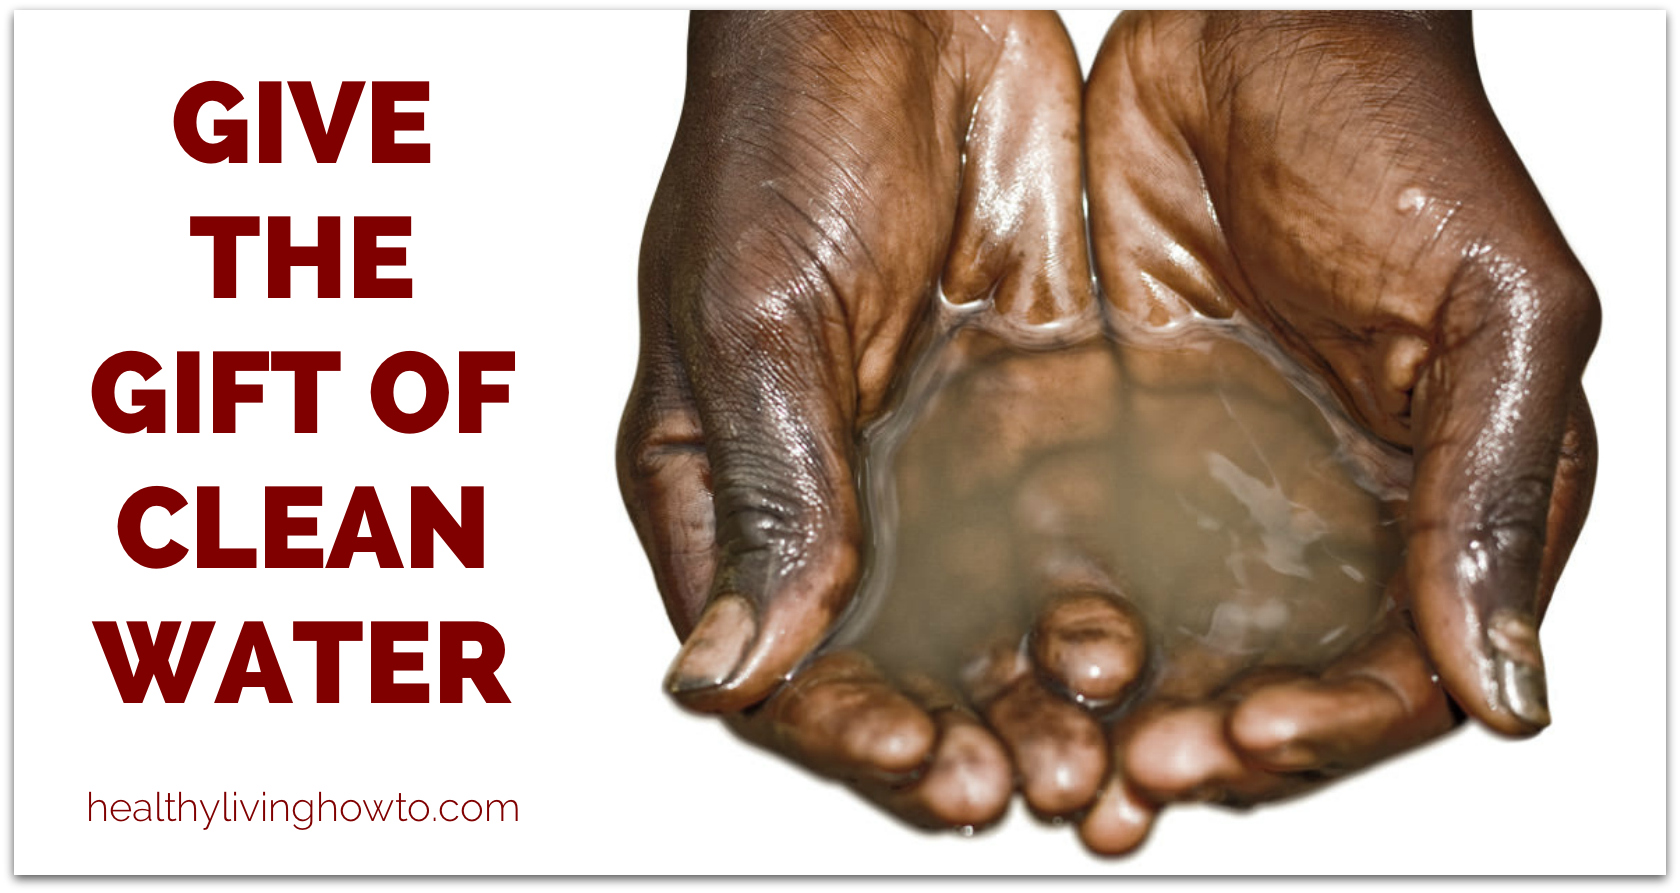 Give the Gift of Clean Water